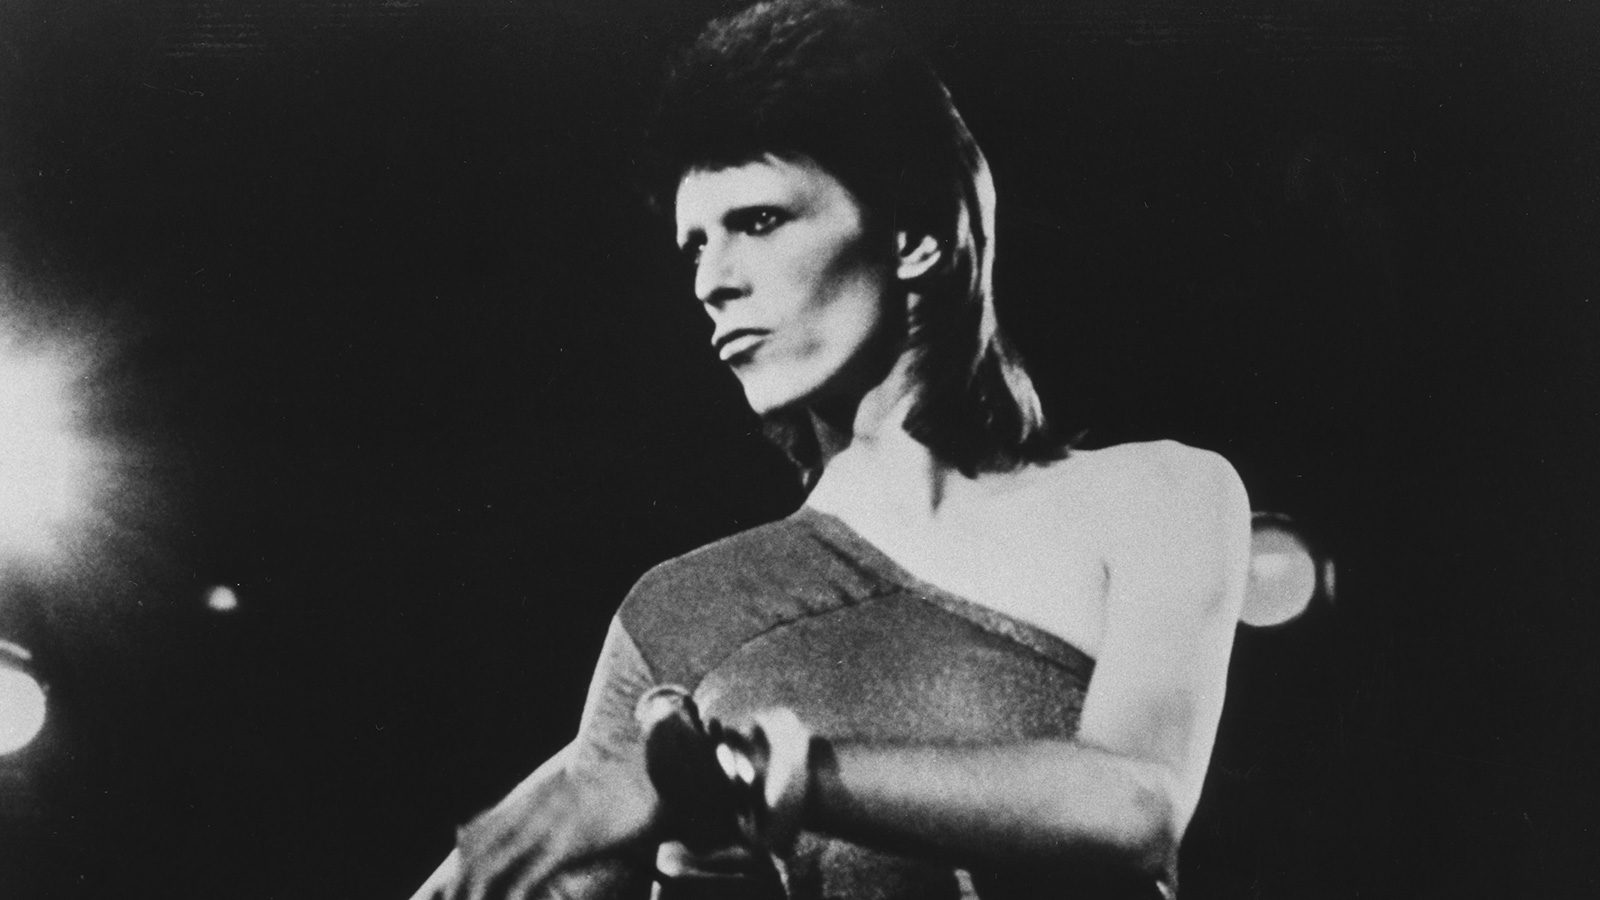 BBC Four - Storyville, Ziggy Stardust and the Spiders from Mars